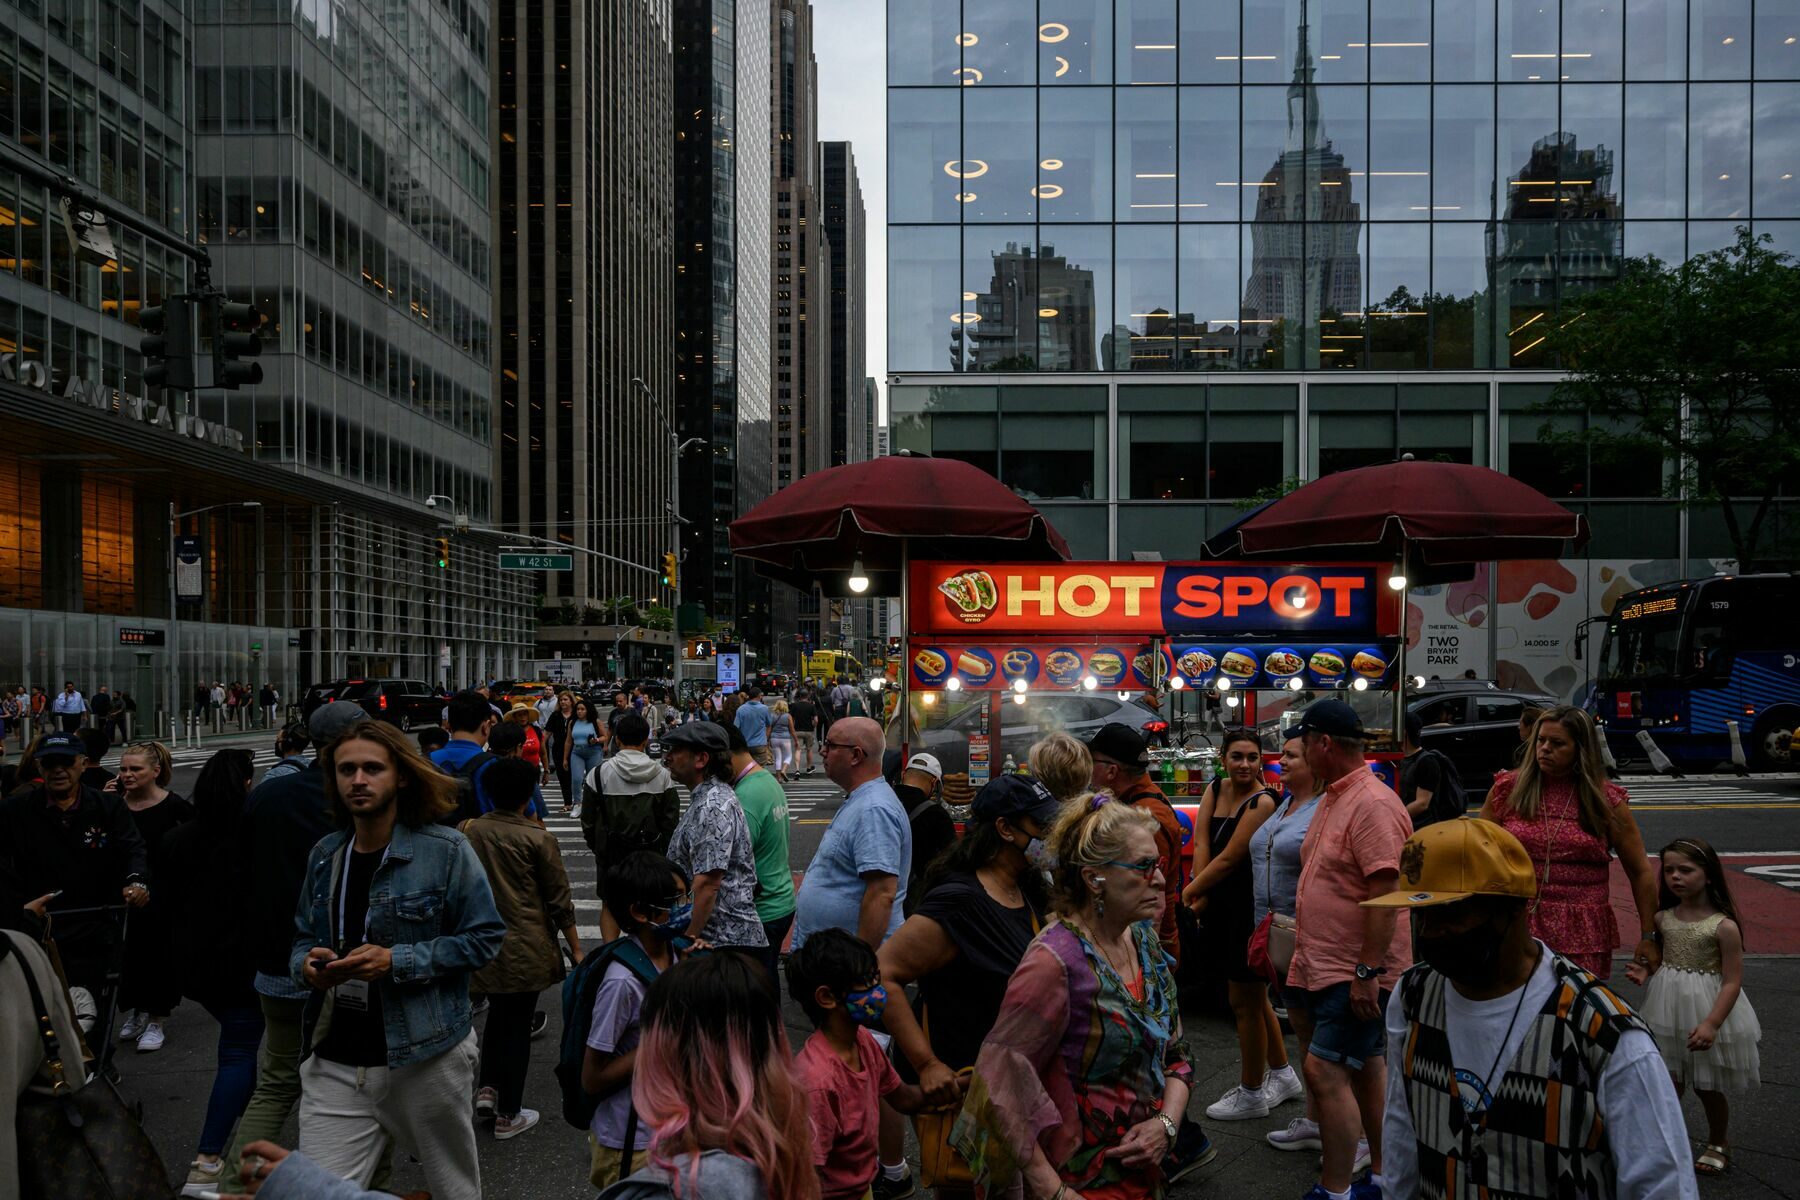 People make their way along a city street past a food vendor in New York.